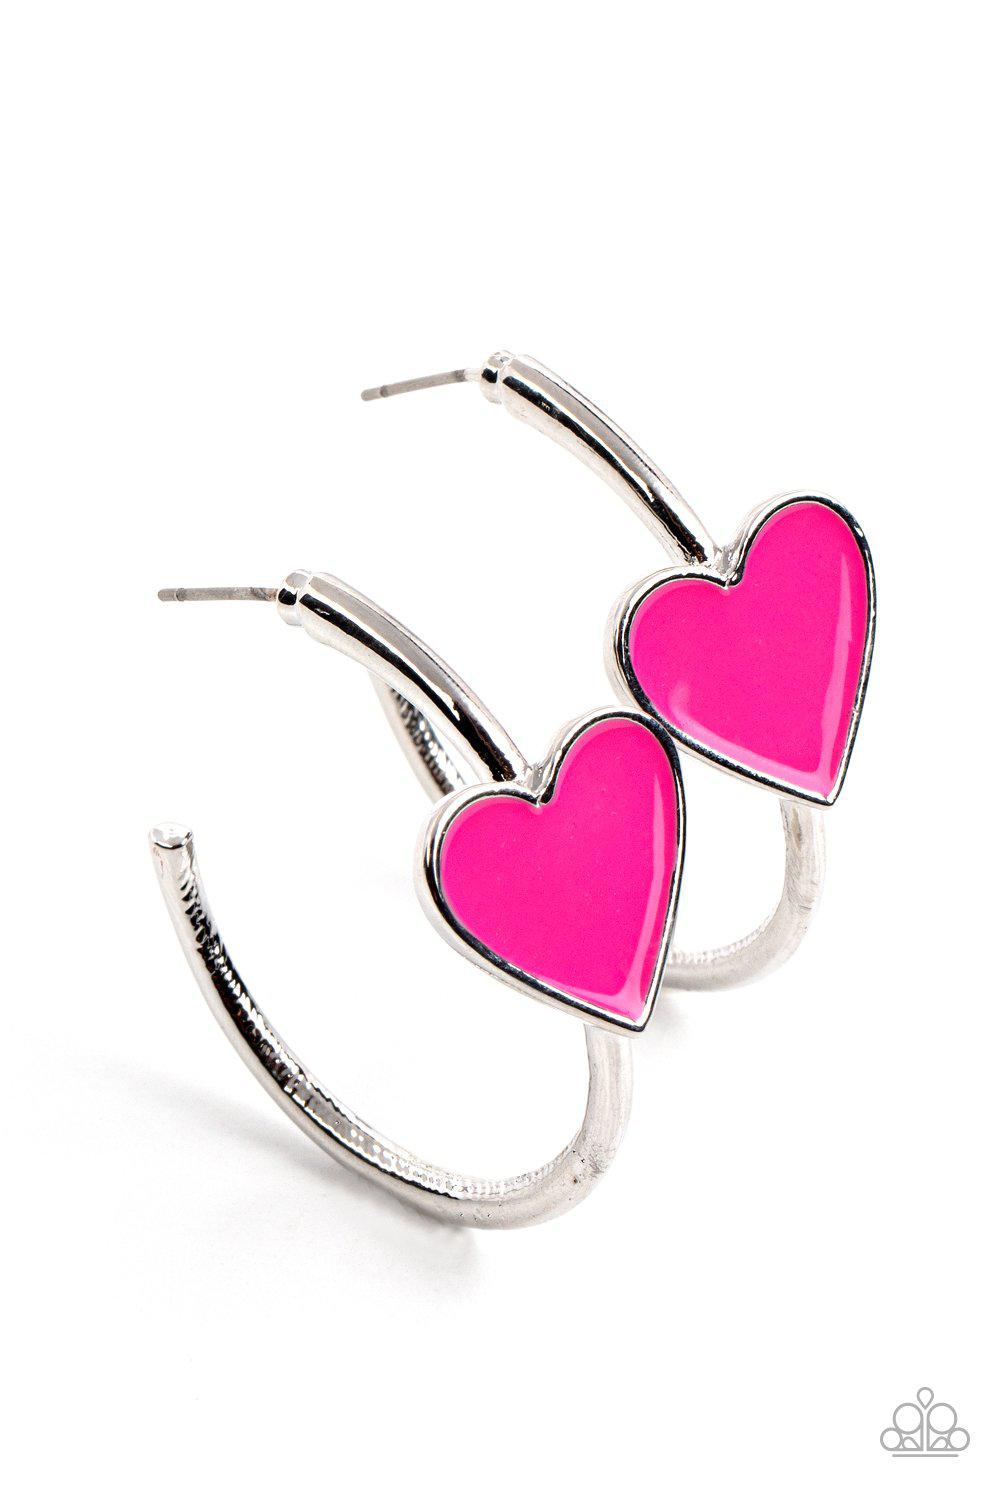 Kiss Up Pink Heart Hoop Earrings - Paparazzi Accessories- lightbox - CarasShop.com - $5 Jewelry by Cara Jewels